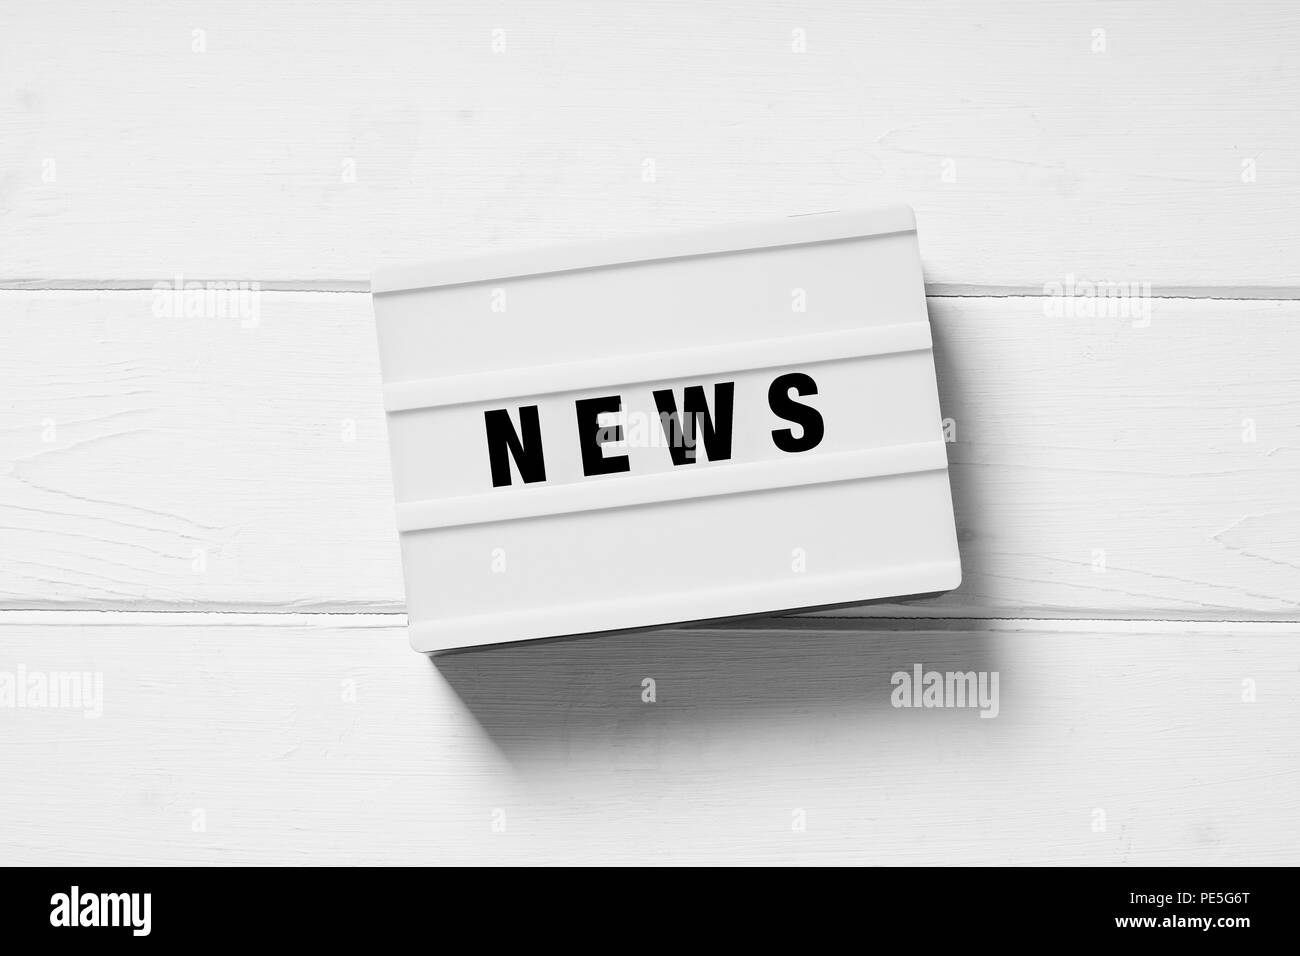 news text on light box sign on white wooden background Stock Photo